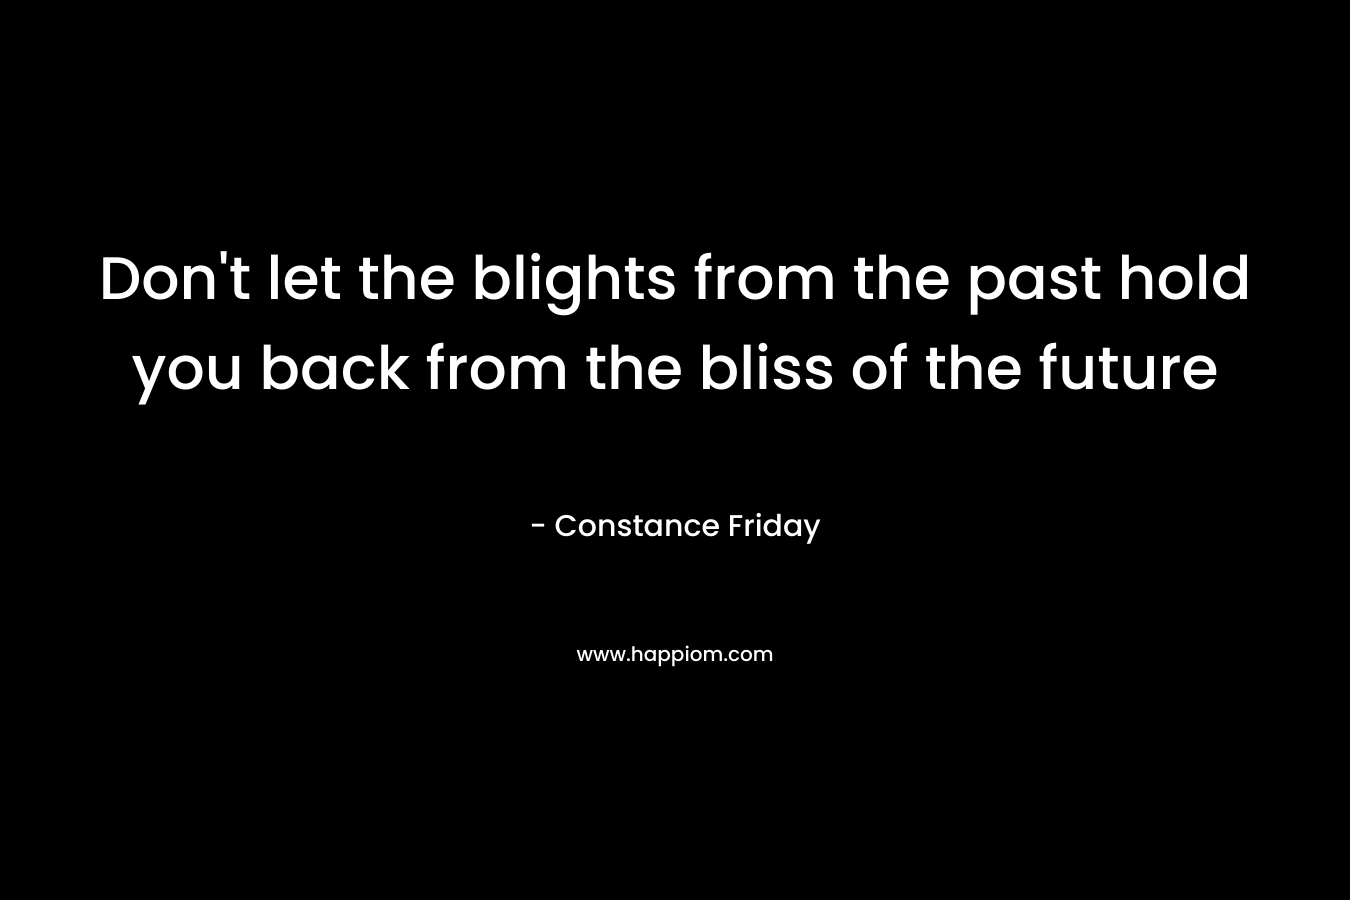 Don't let the blights from the past hold you back from the bliss of the future